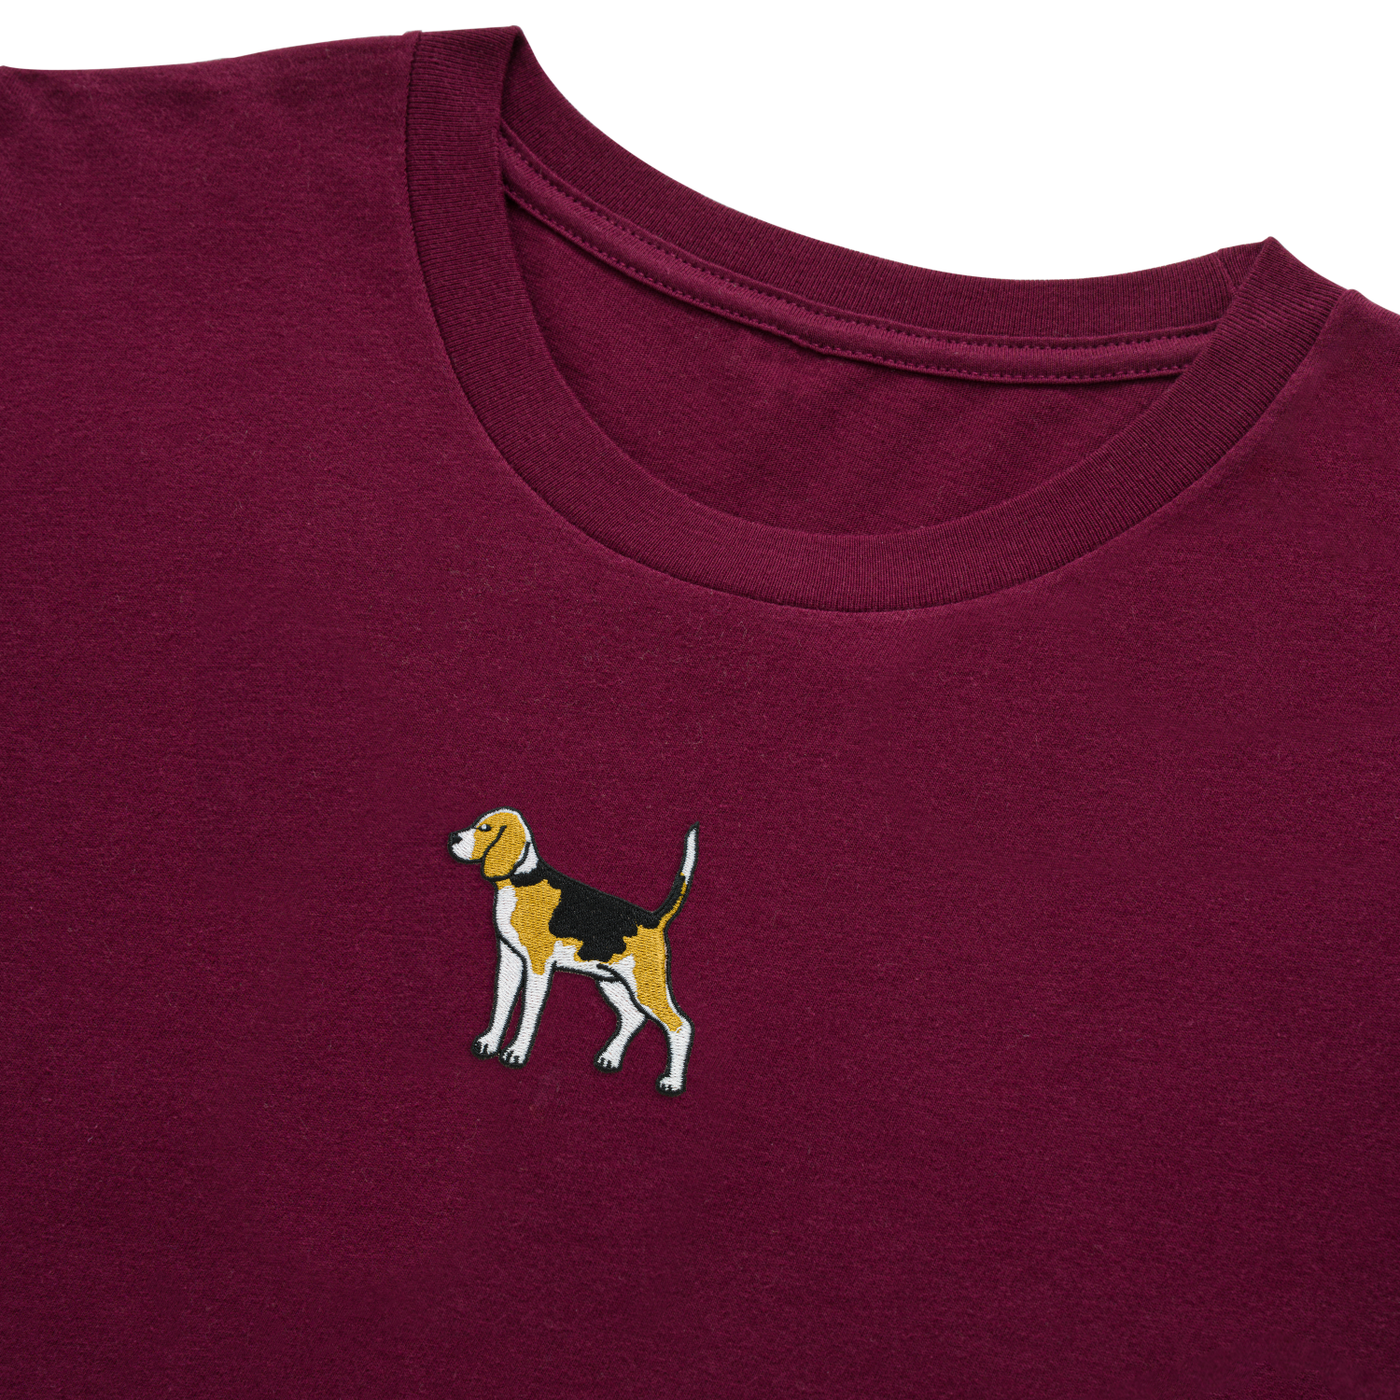 Bobby's Planet Men's Embroidered Beagle Long Sleeve Shirt from Paws Dog Cat Animals Collection in Maroon Color#color_maroon